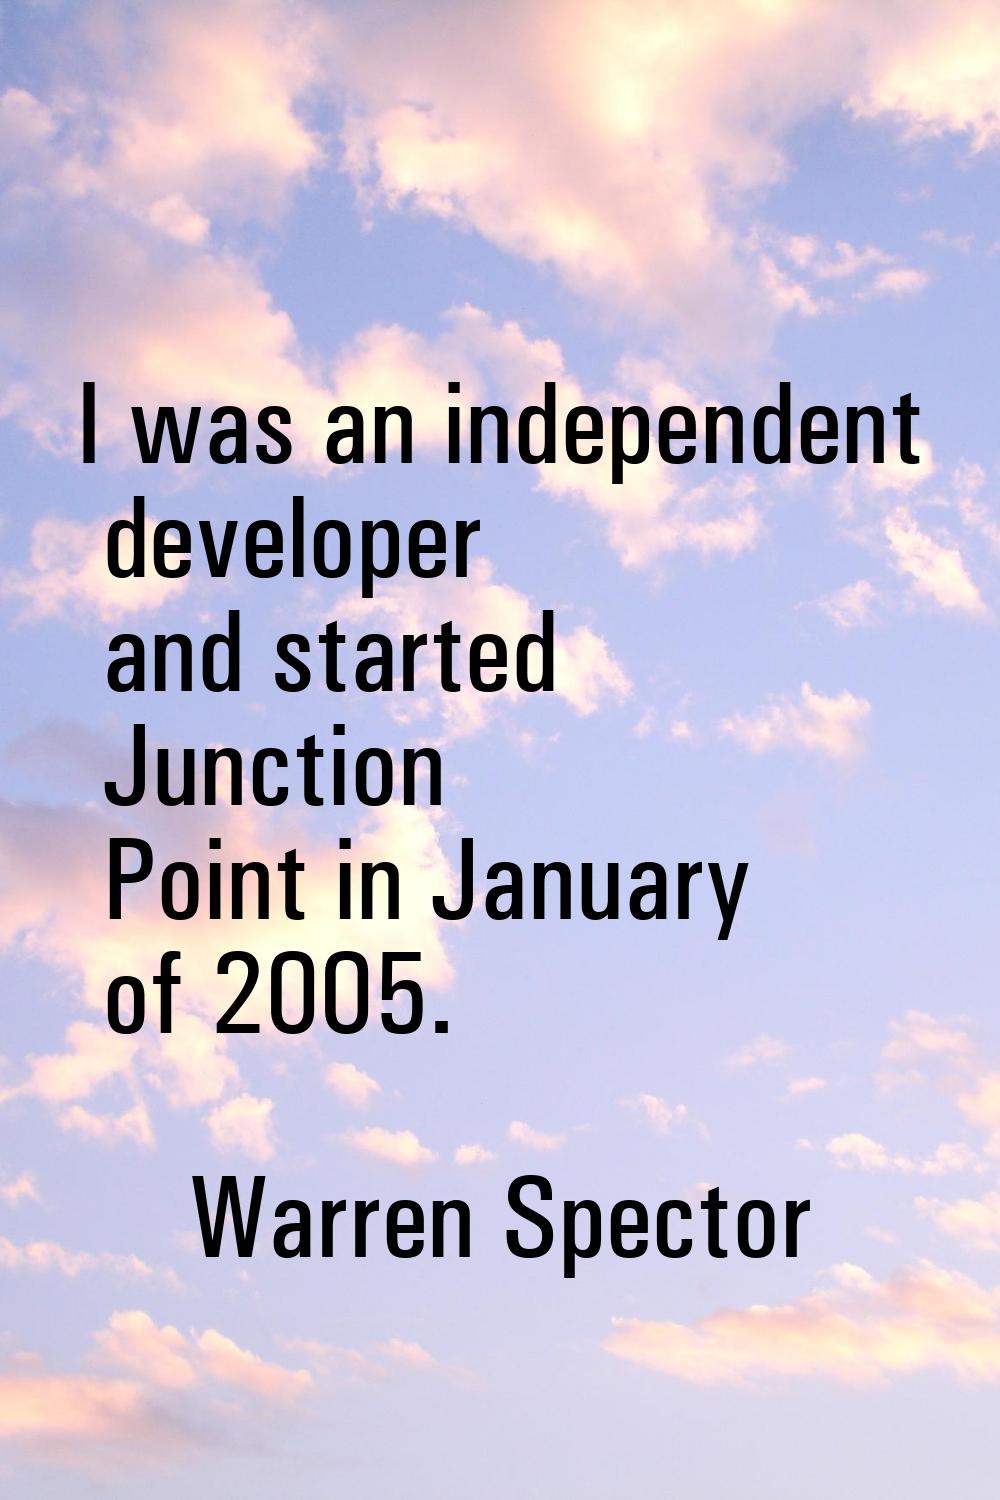 I was an independent developer and started Junction Point in January of 2005.